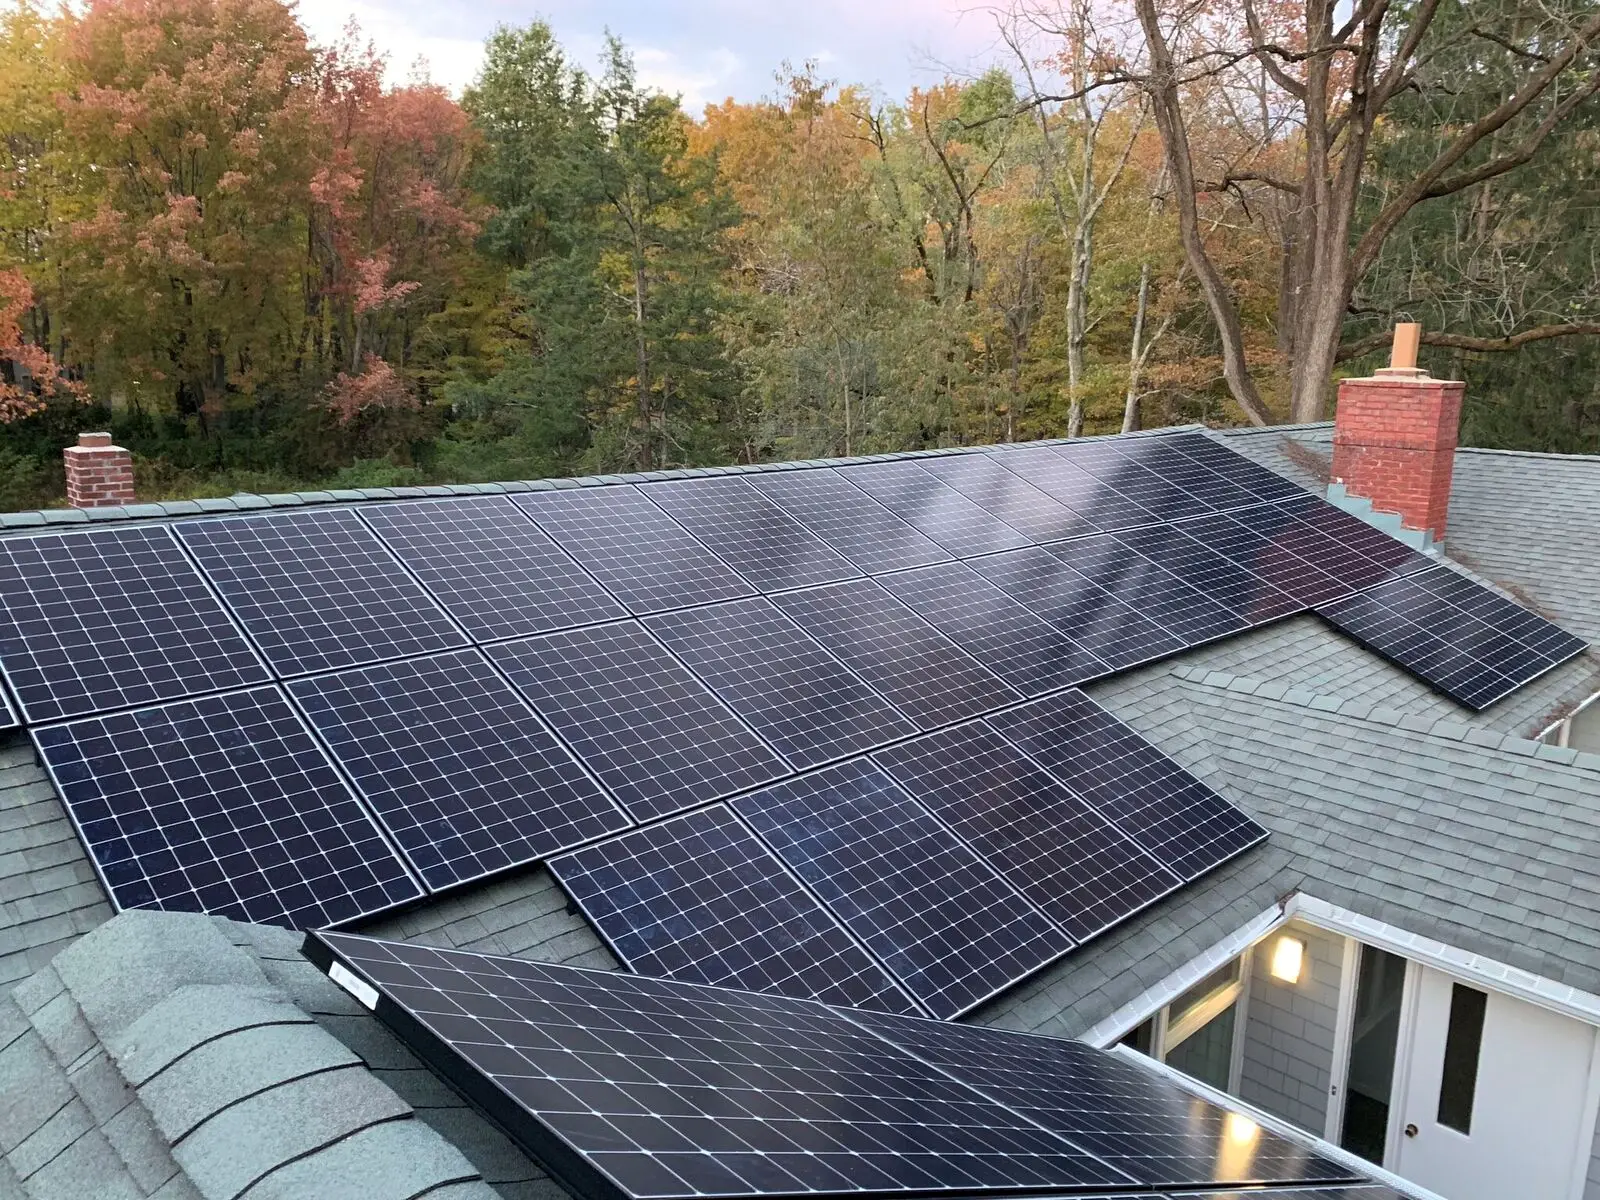 How Much Does It Cost to Install Solar Power in Your Home?